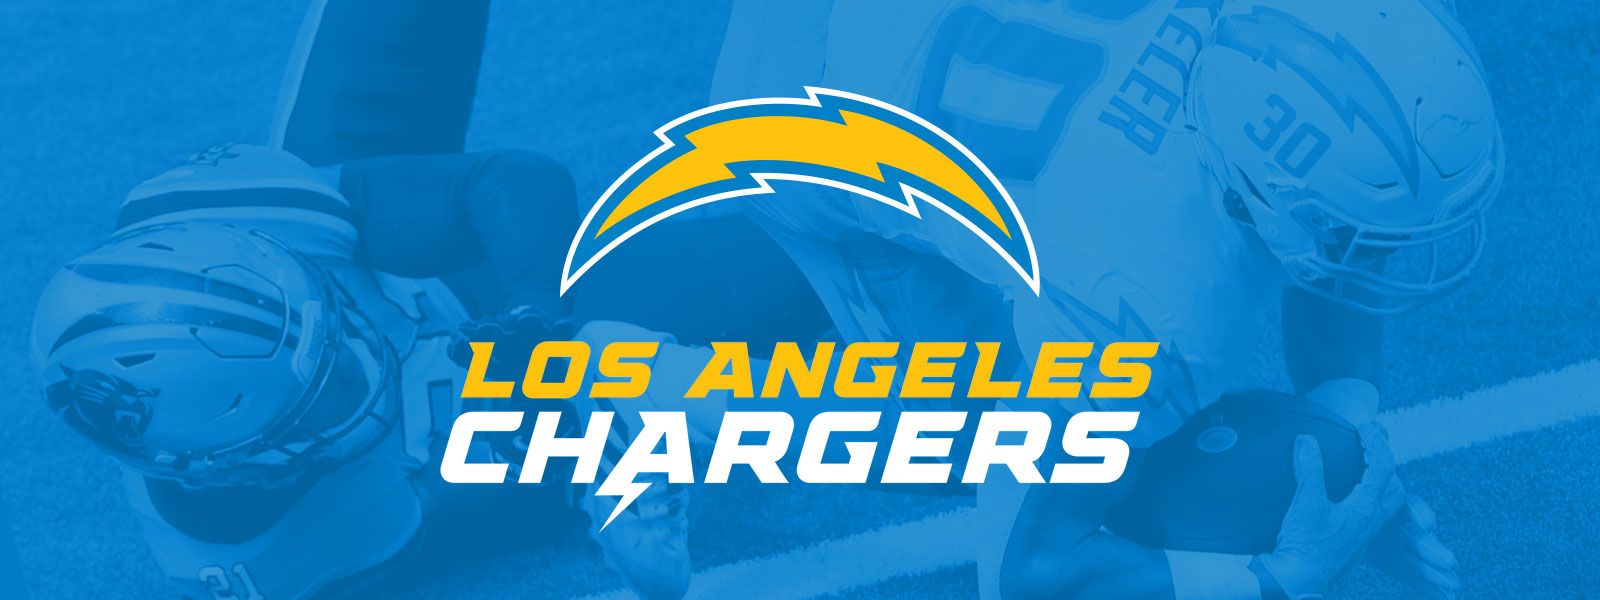 LA Chargers vs. Tennessee Titans 2022 - Los Angeles Airport Peace